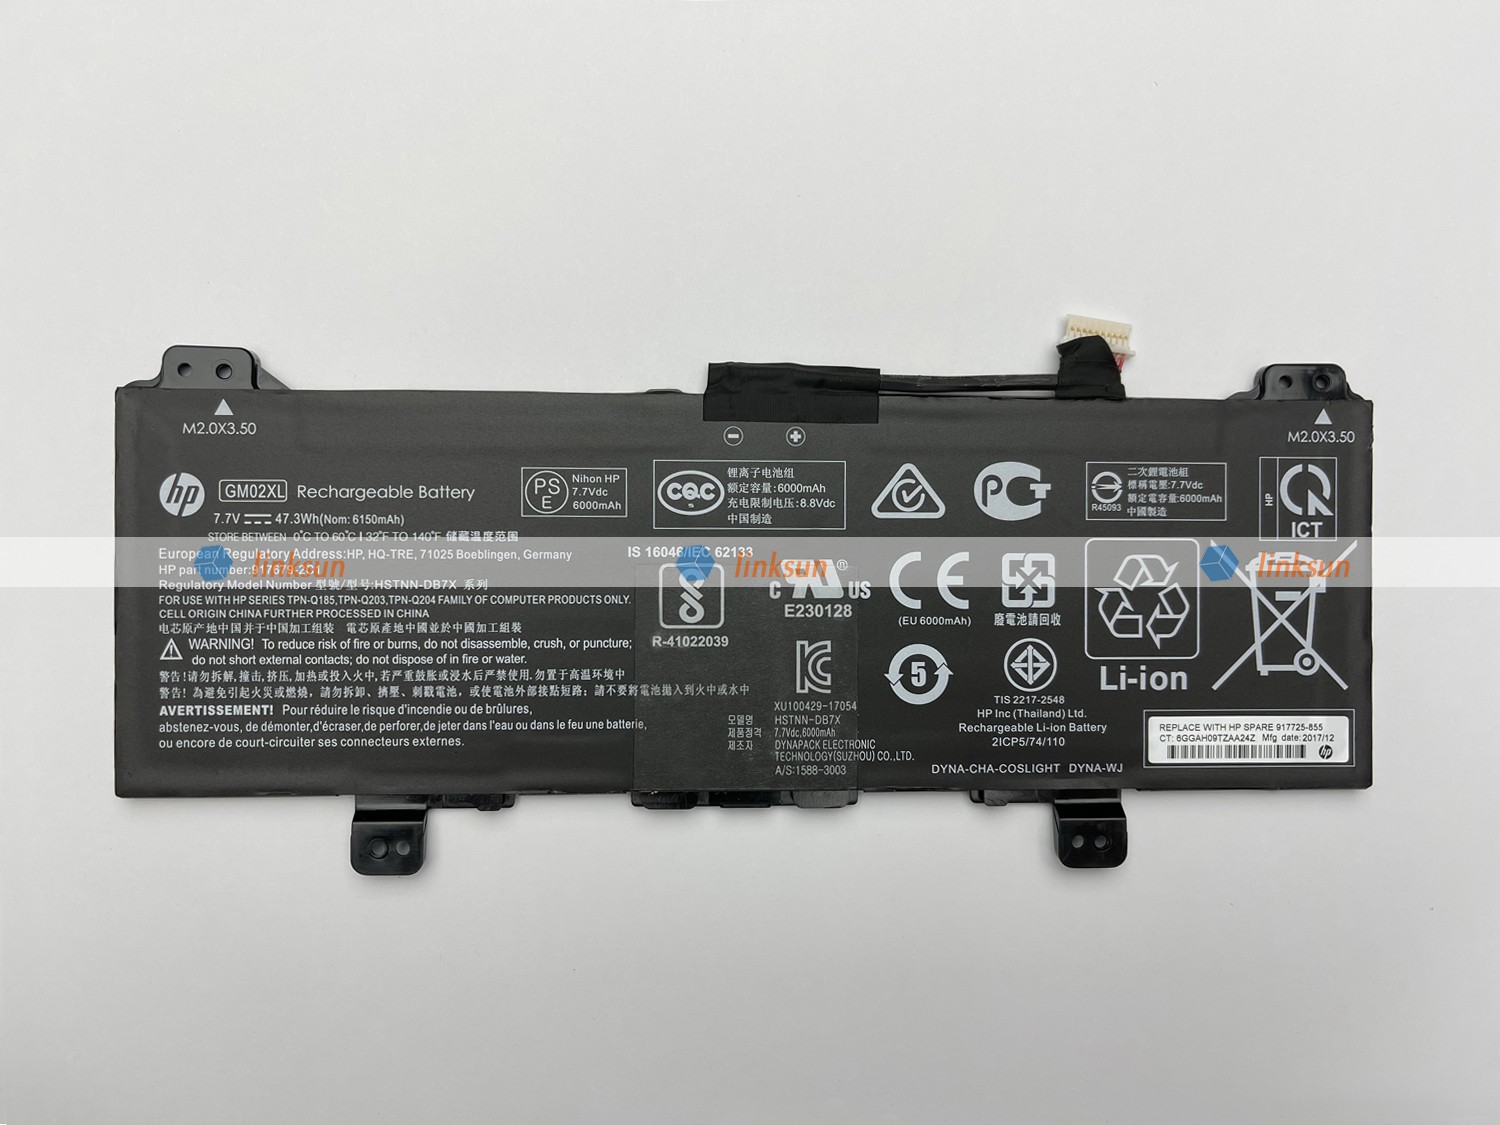 HP GM02XL battery front